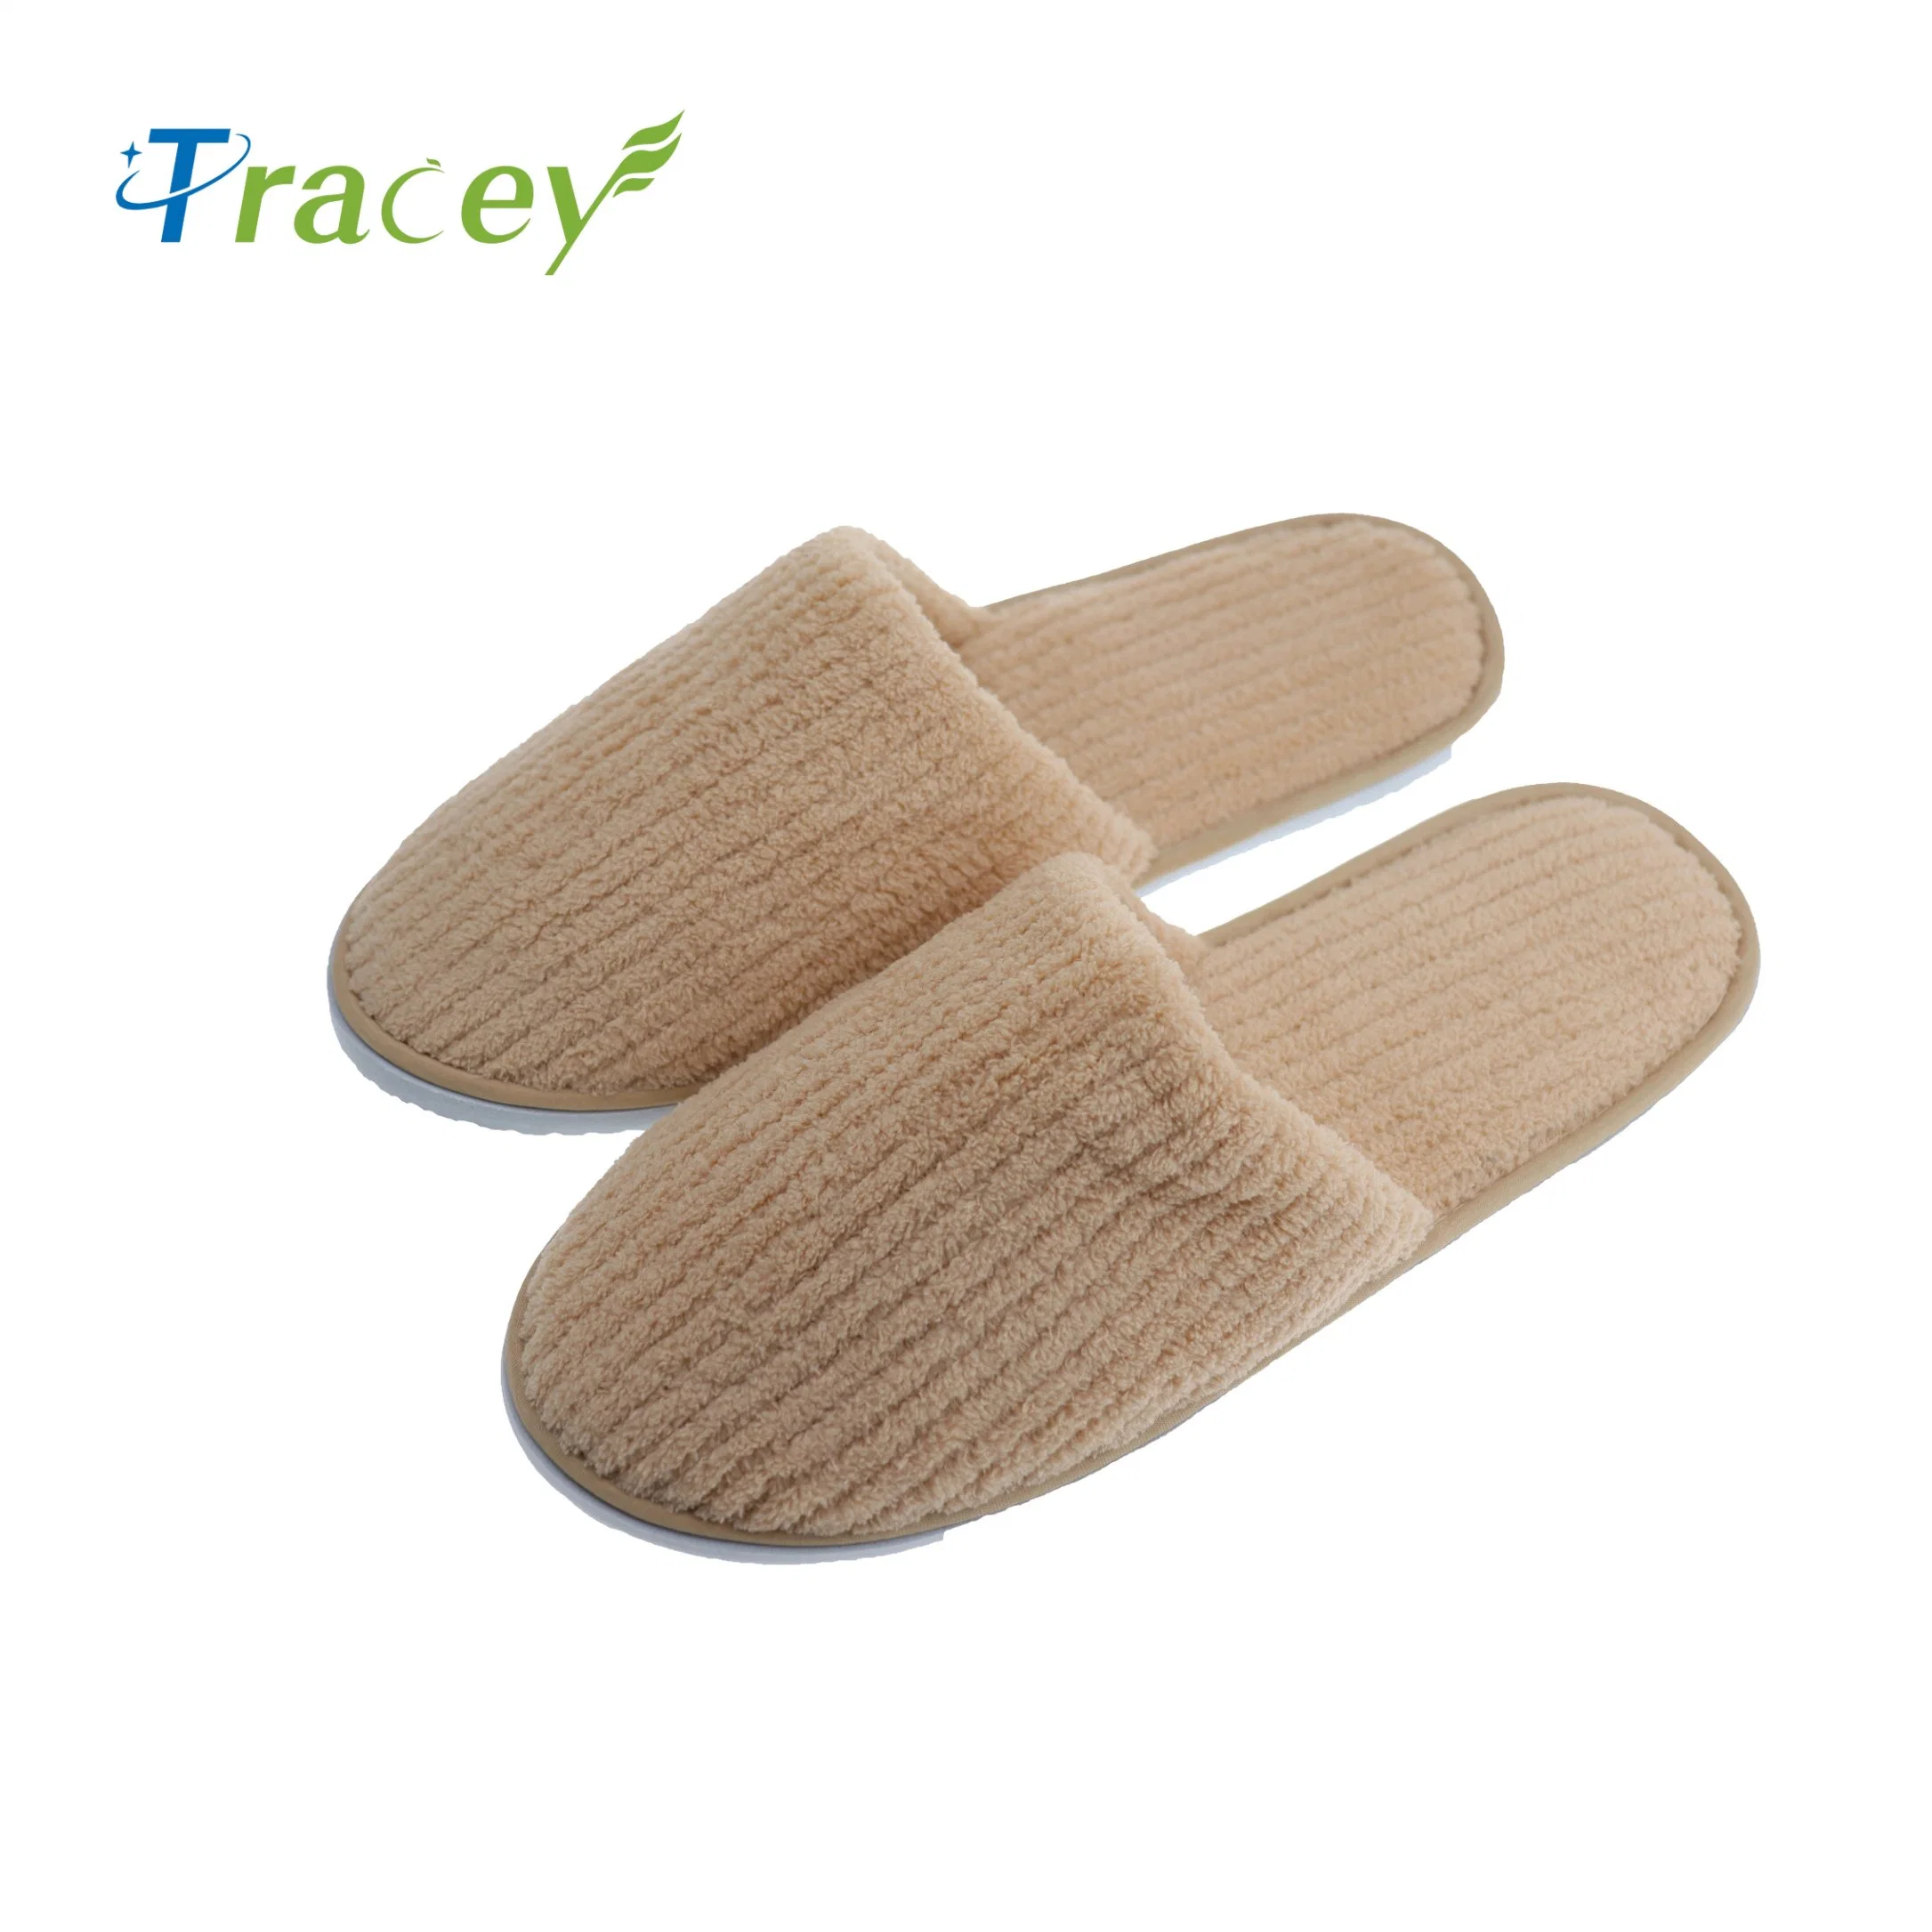 Wholesale High Quality Hilton Hotel Room Amenities Terry White Disposable Hotel Slippers